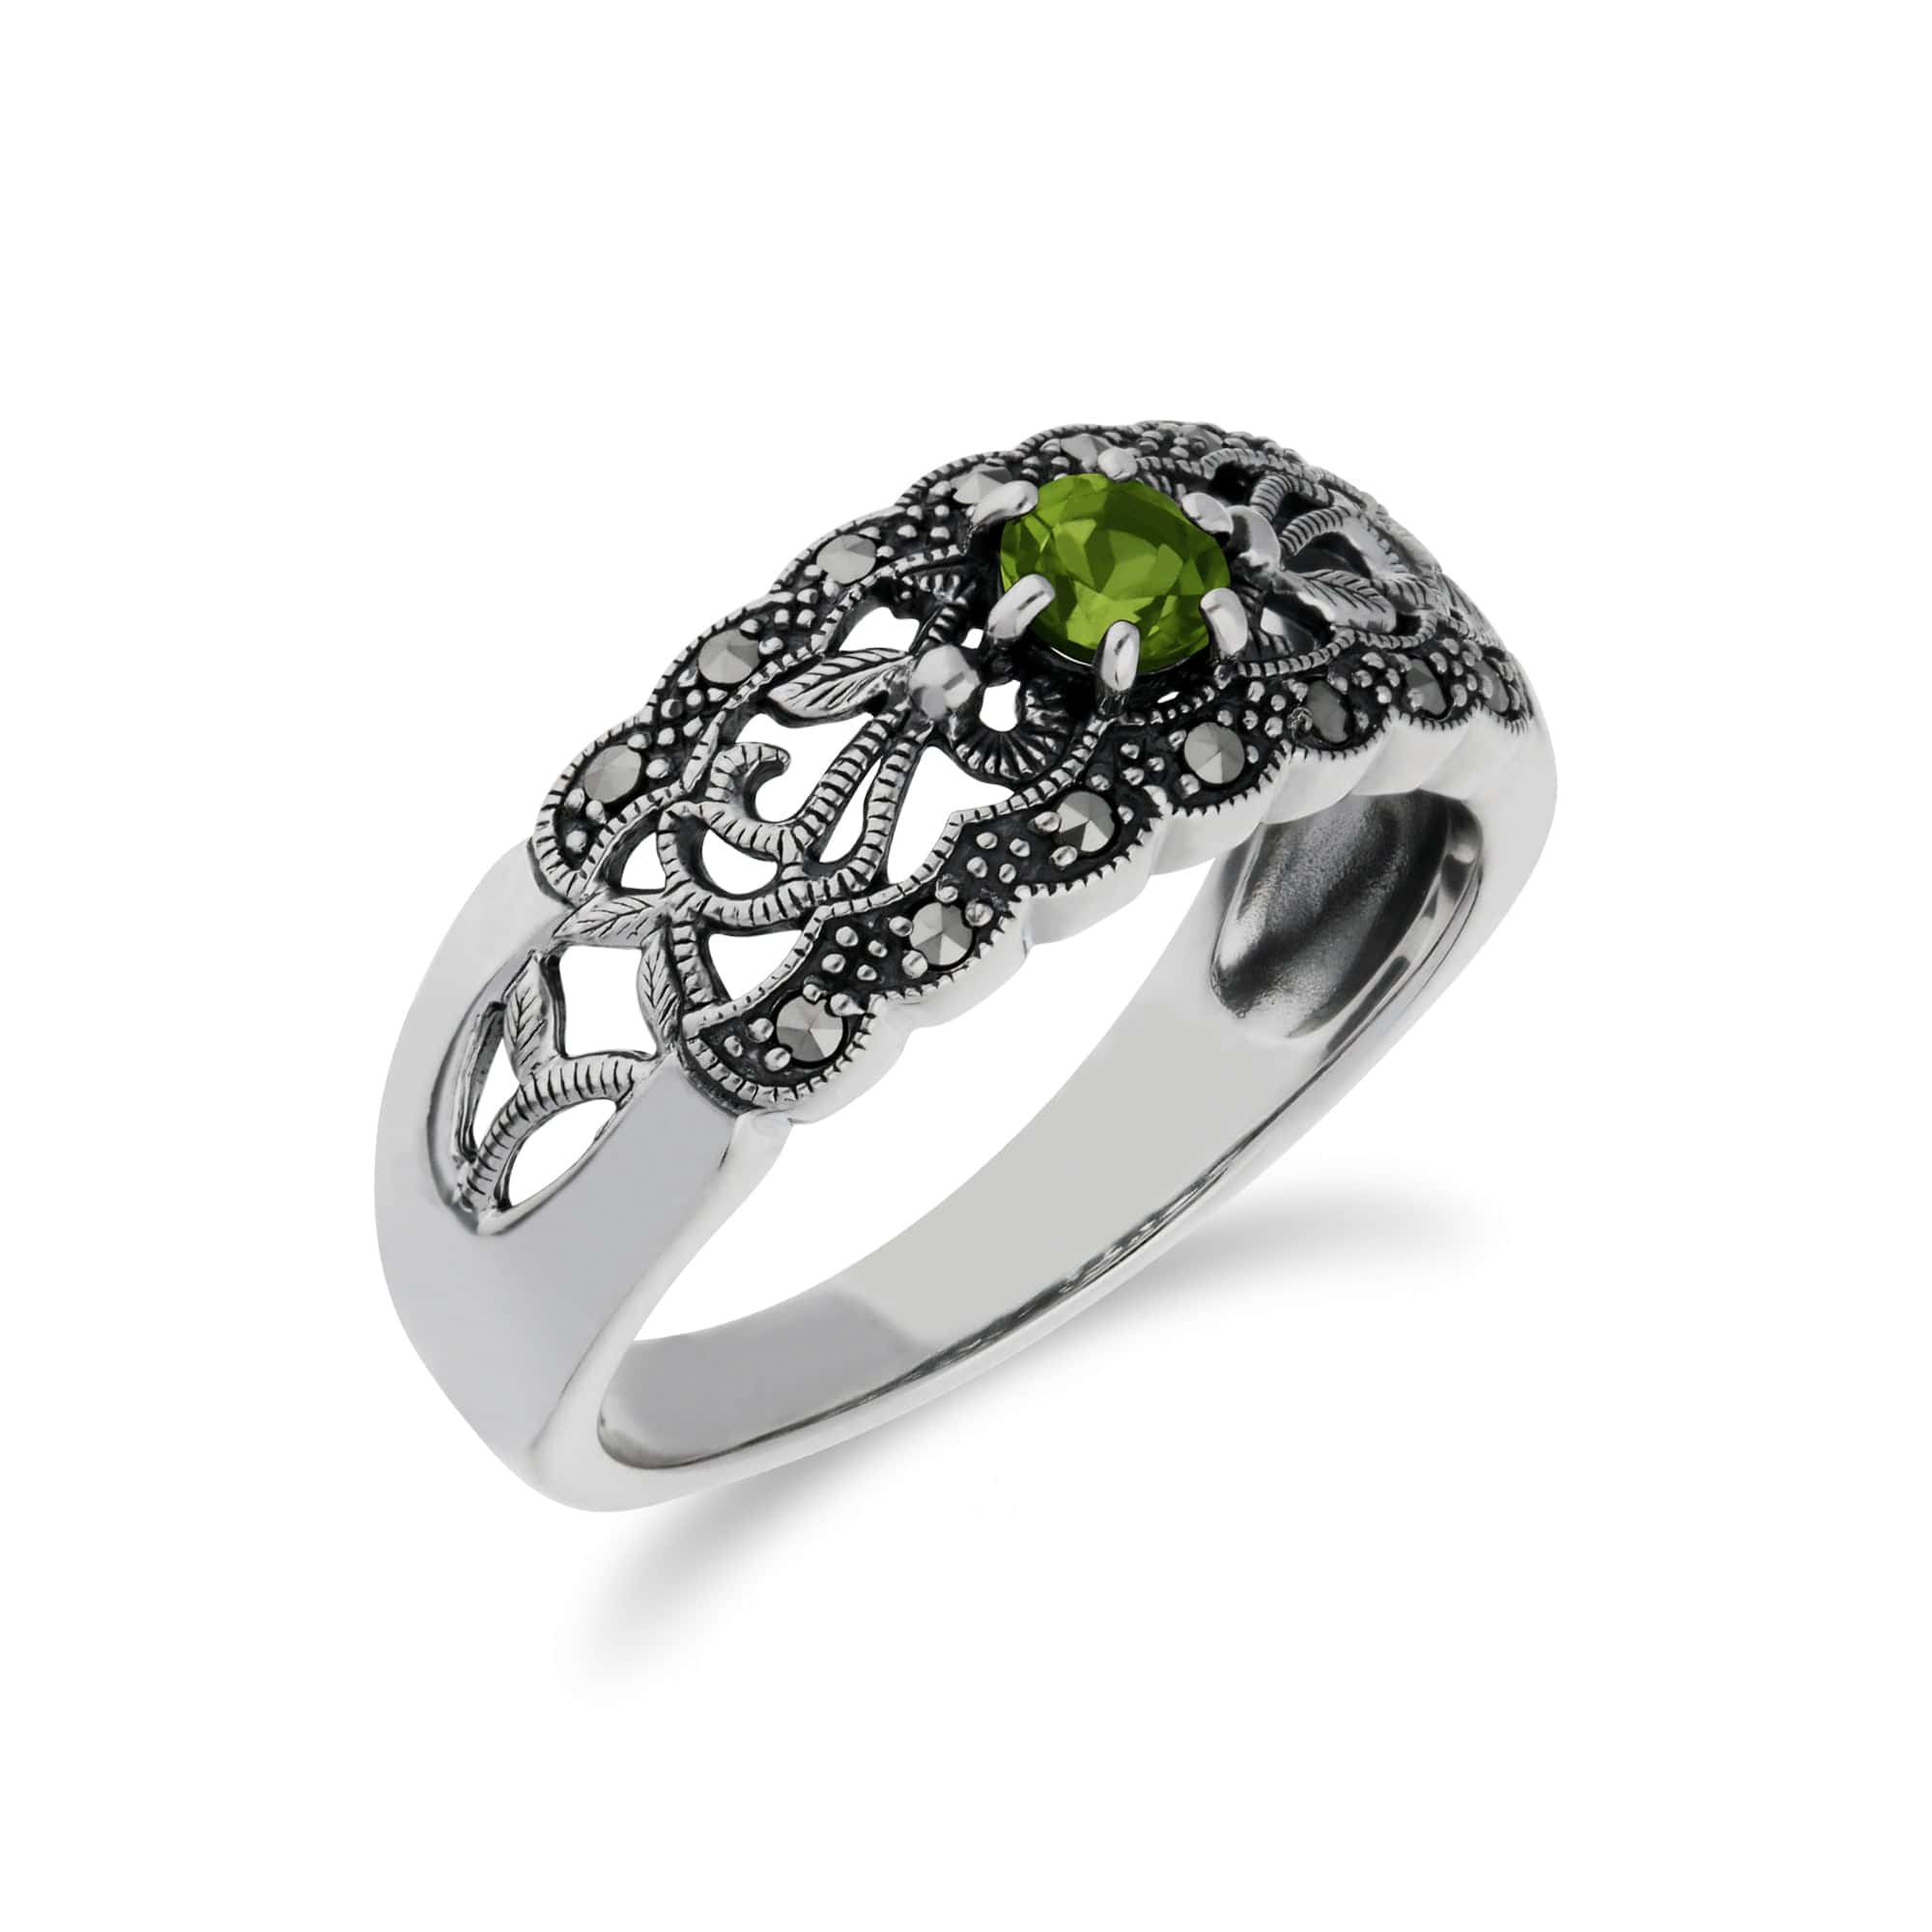 Art Nouveau Style Round Peridot & Marcasite Floral Band Ring in 925 Sterling Silver - Gemondo